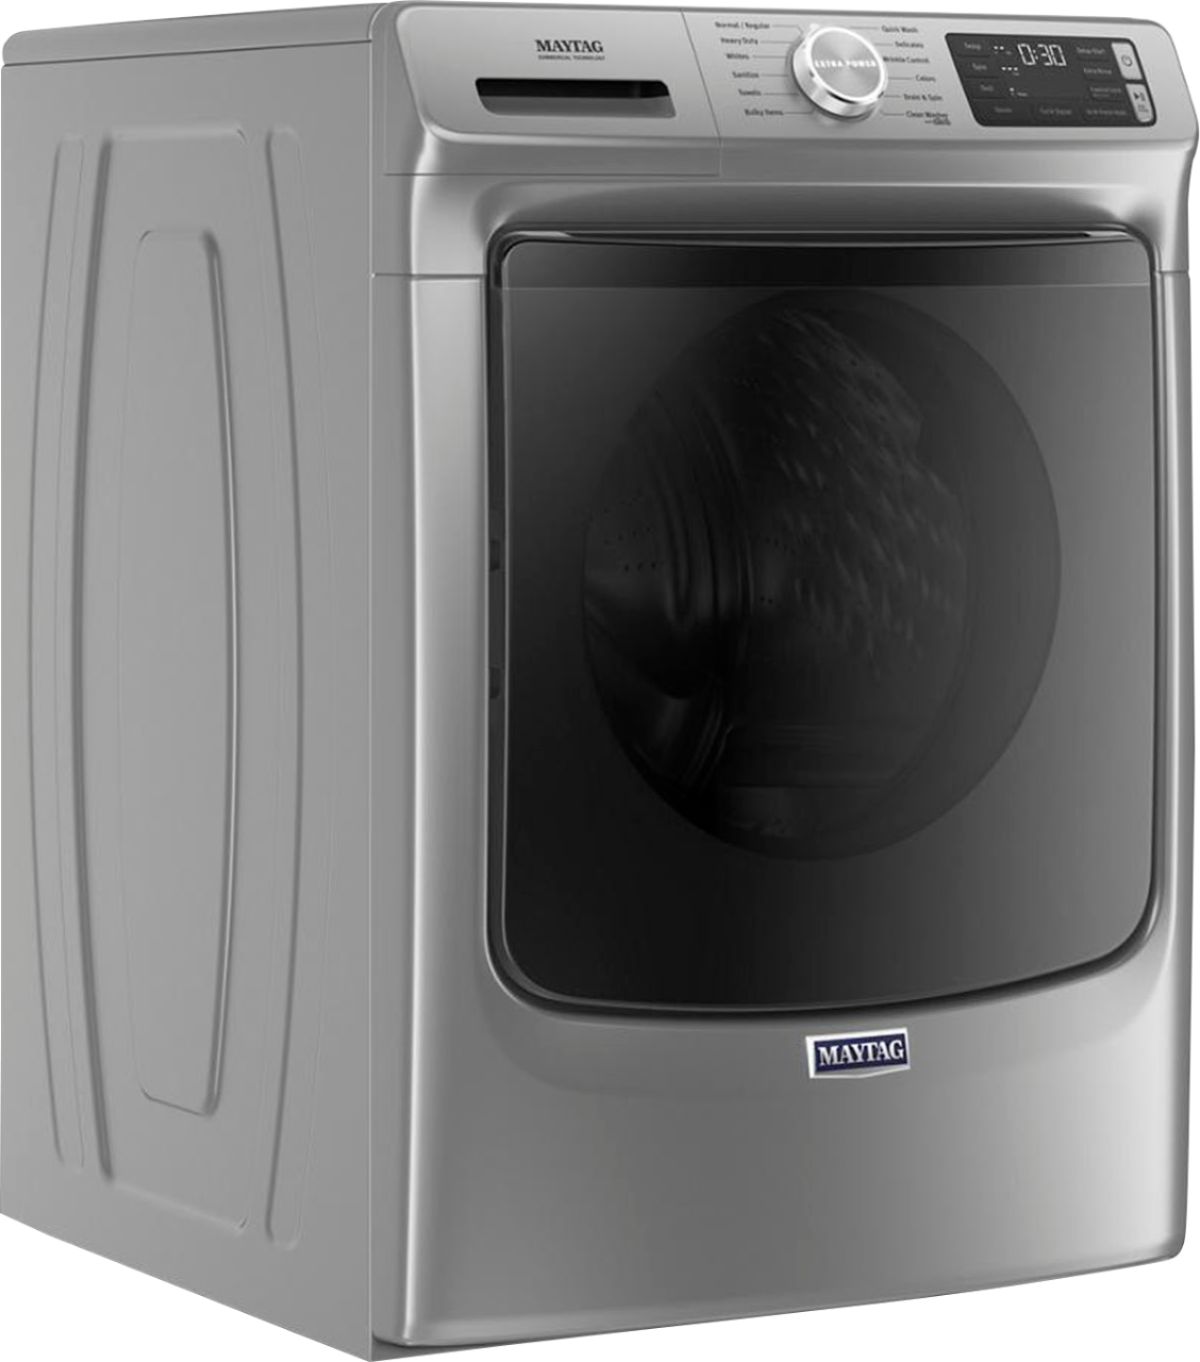 Angle View: Maytag - 4.8 Cu. Ft. High Efficiency Stackable Front Load Washer with Steam and Extra Power Button - Metallic slate